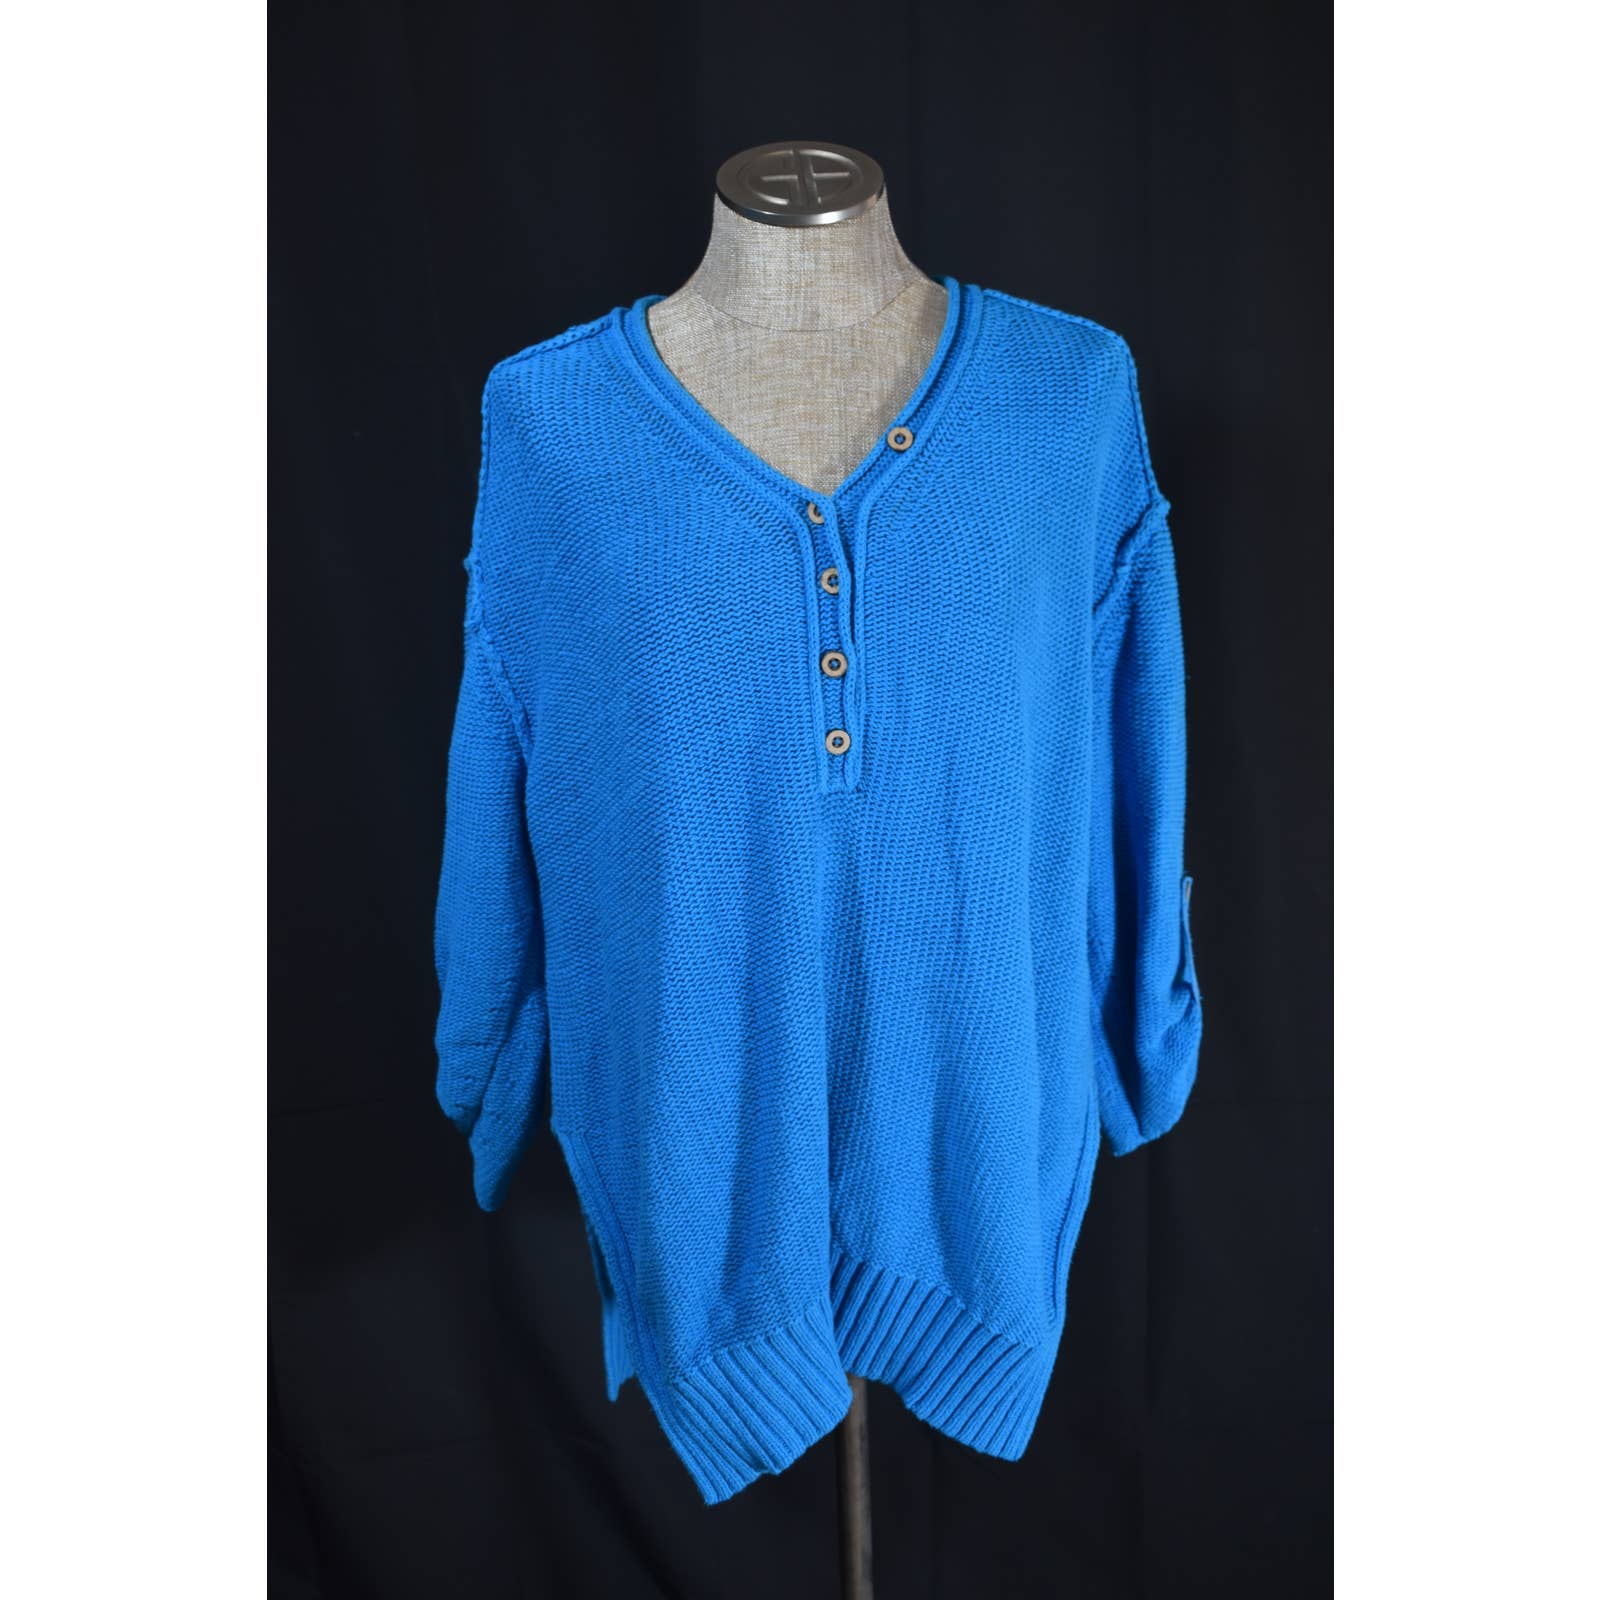 Free People We The Free Blue Chunky Henley Knit Tunic Sweater - S